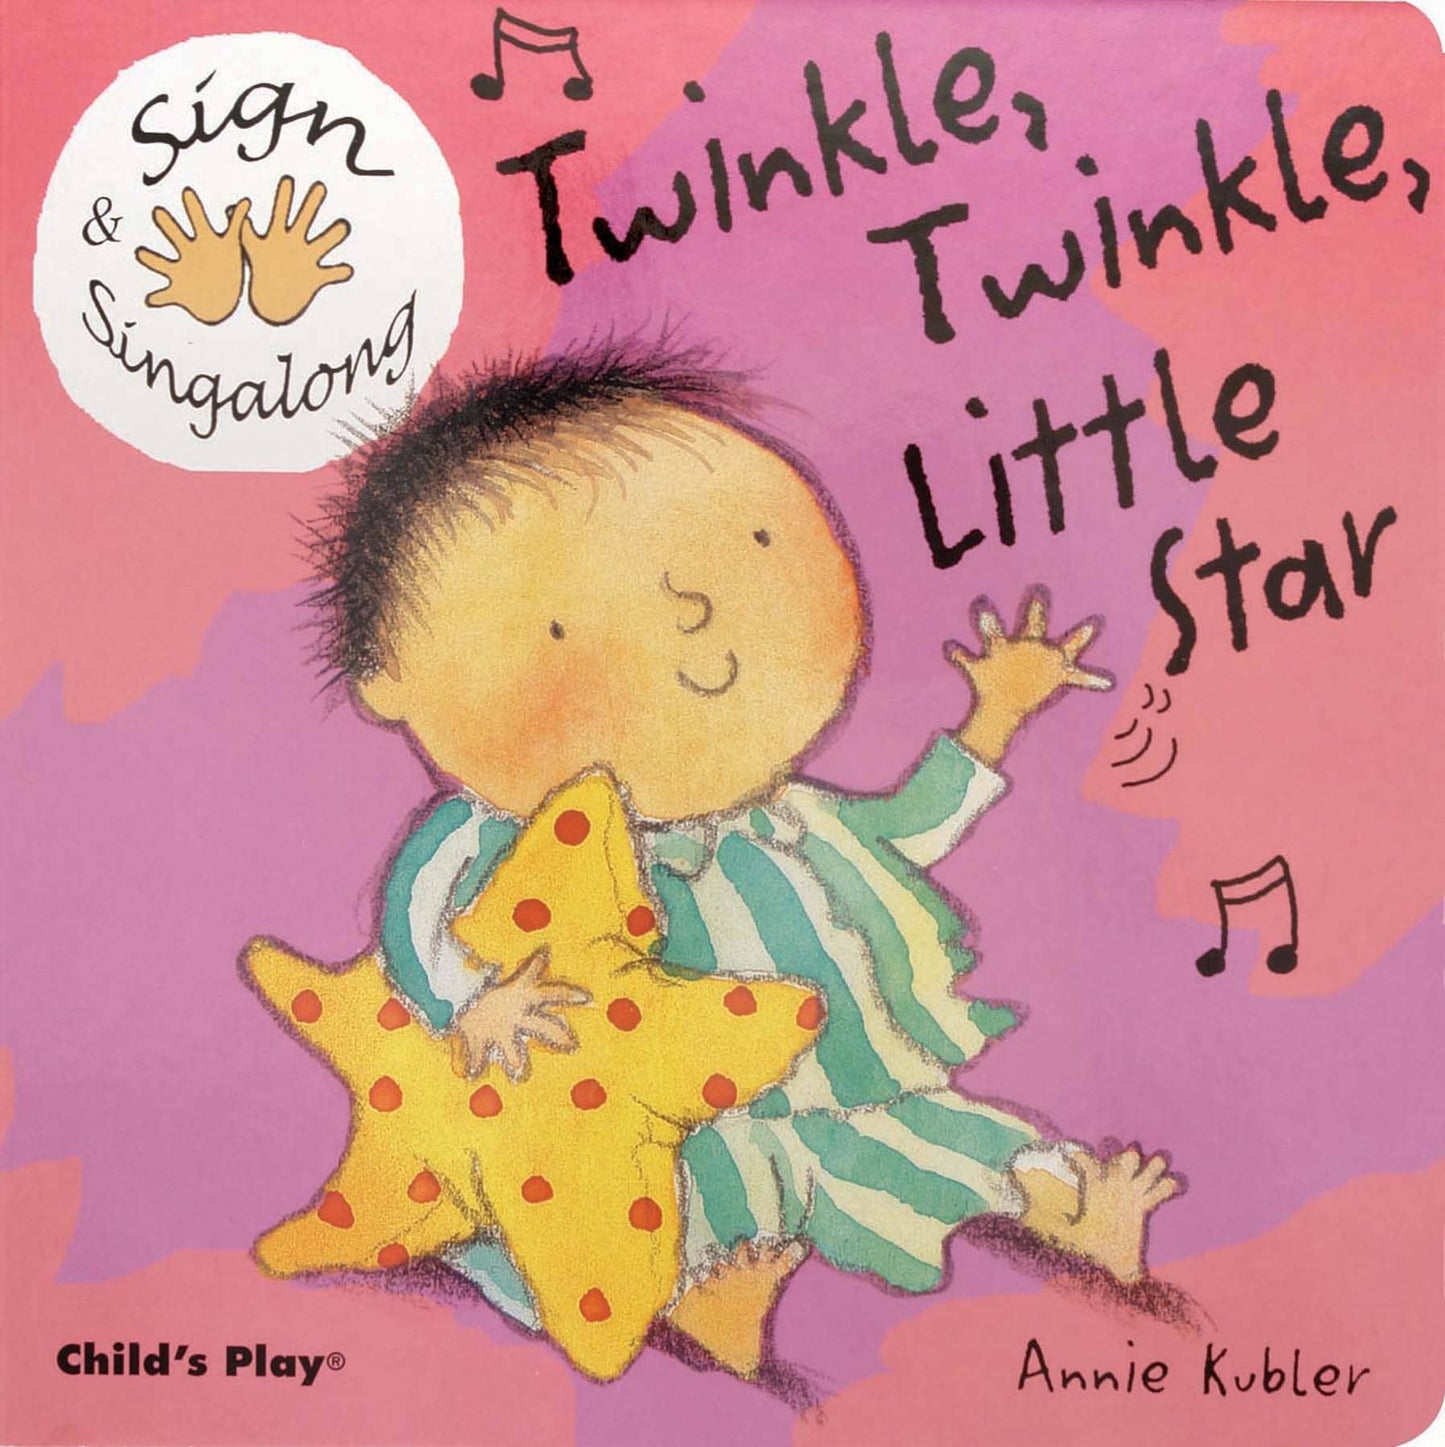 Child's Play Inc. - Twinkle, Twinkle, Little Star: American Sign Language: 7.5 x 7.5 Inches